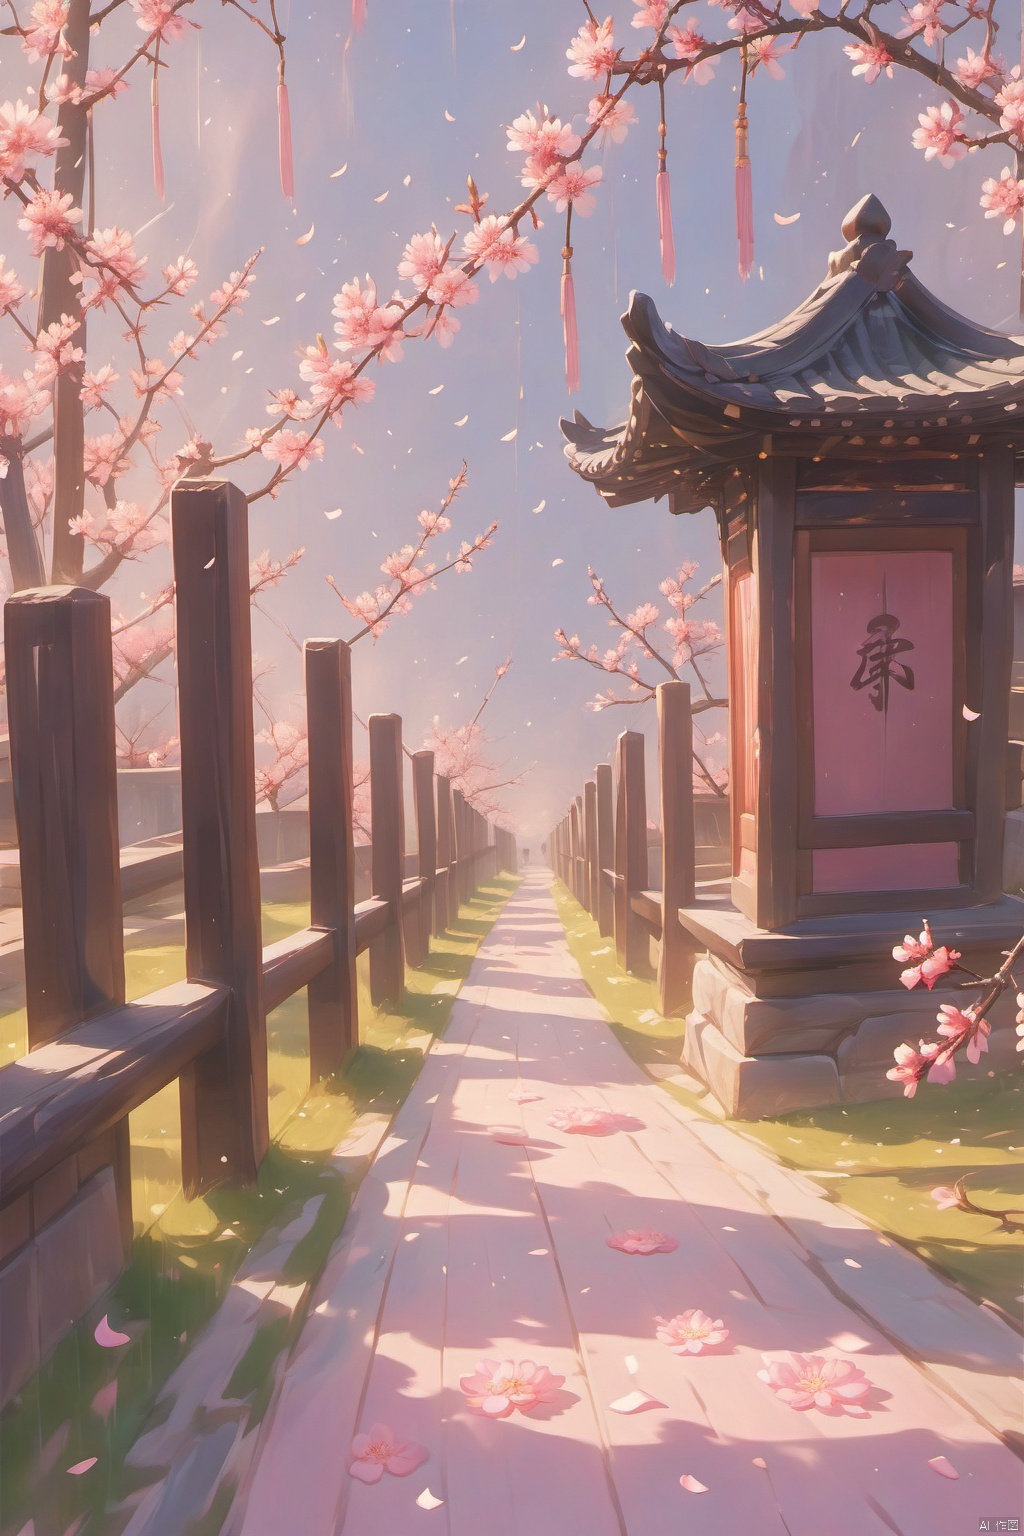 A deserted path, with a plethora of blooming peach blossoms and pink petals falling